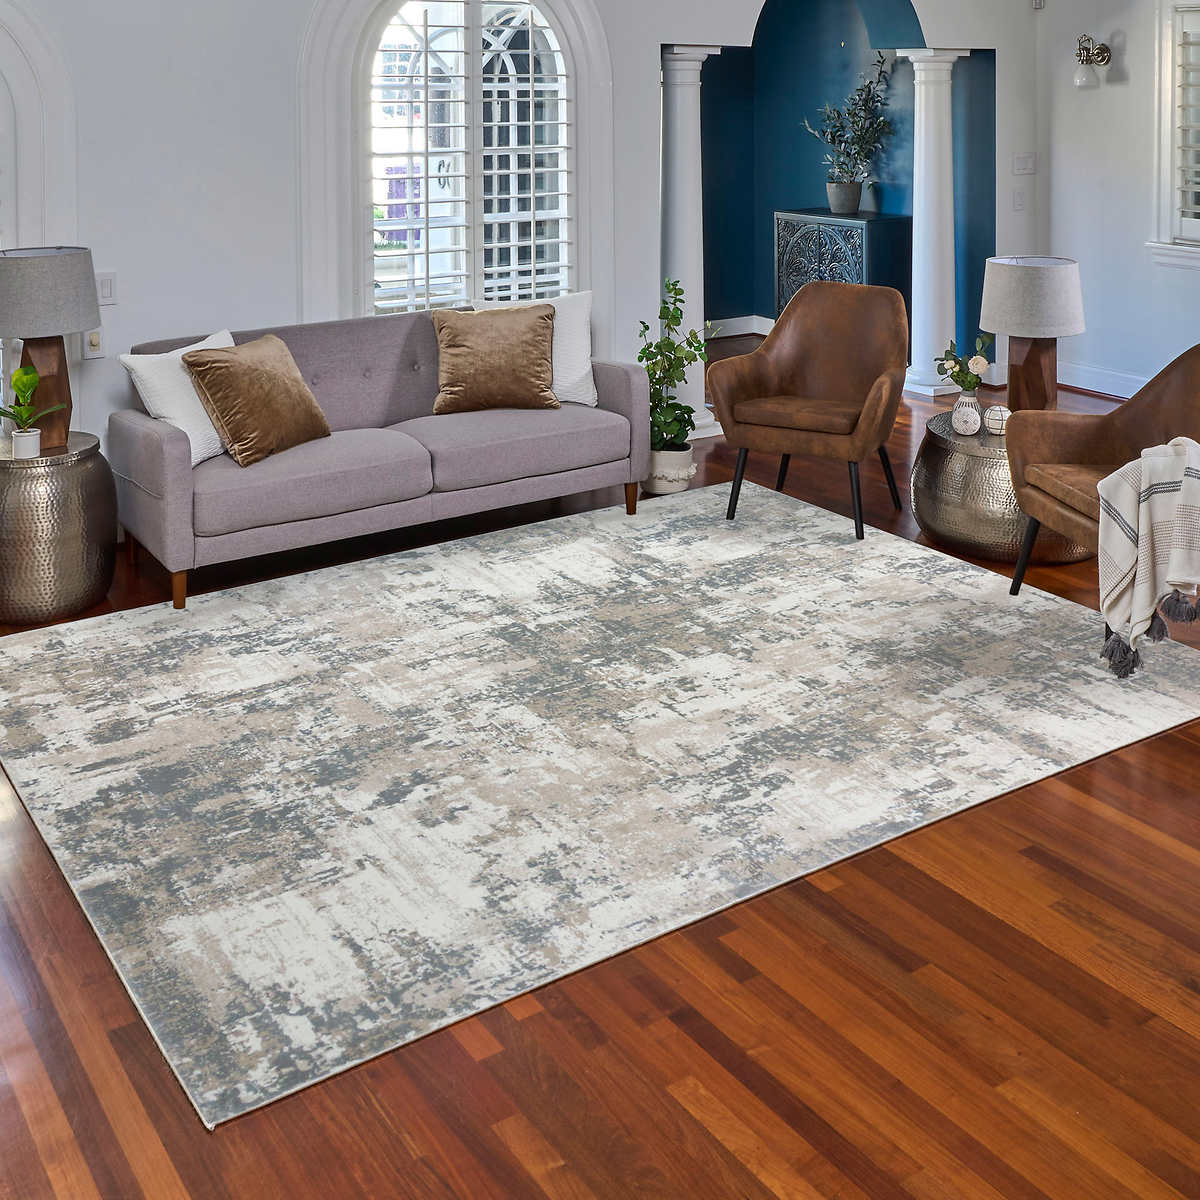 NEW - Costco - Thomasville Timeless Classic Rug Collection 8' 9" x 13' 1", Otello Gray - Retail $449